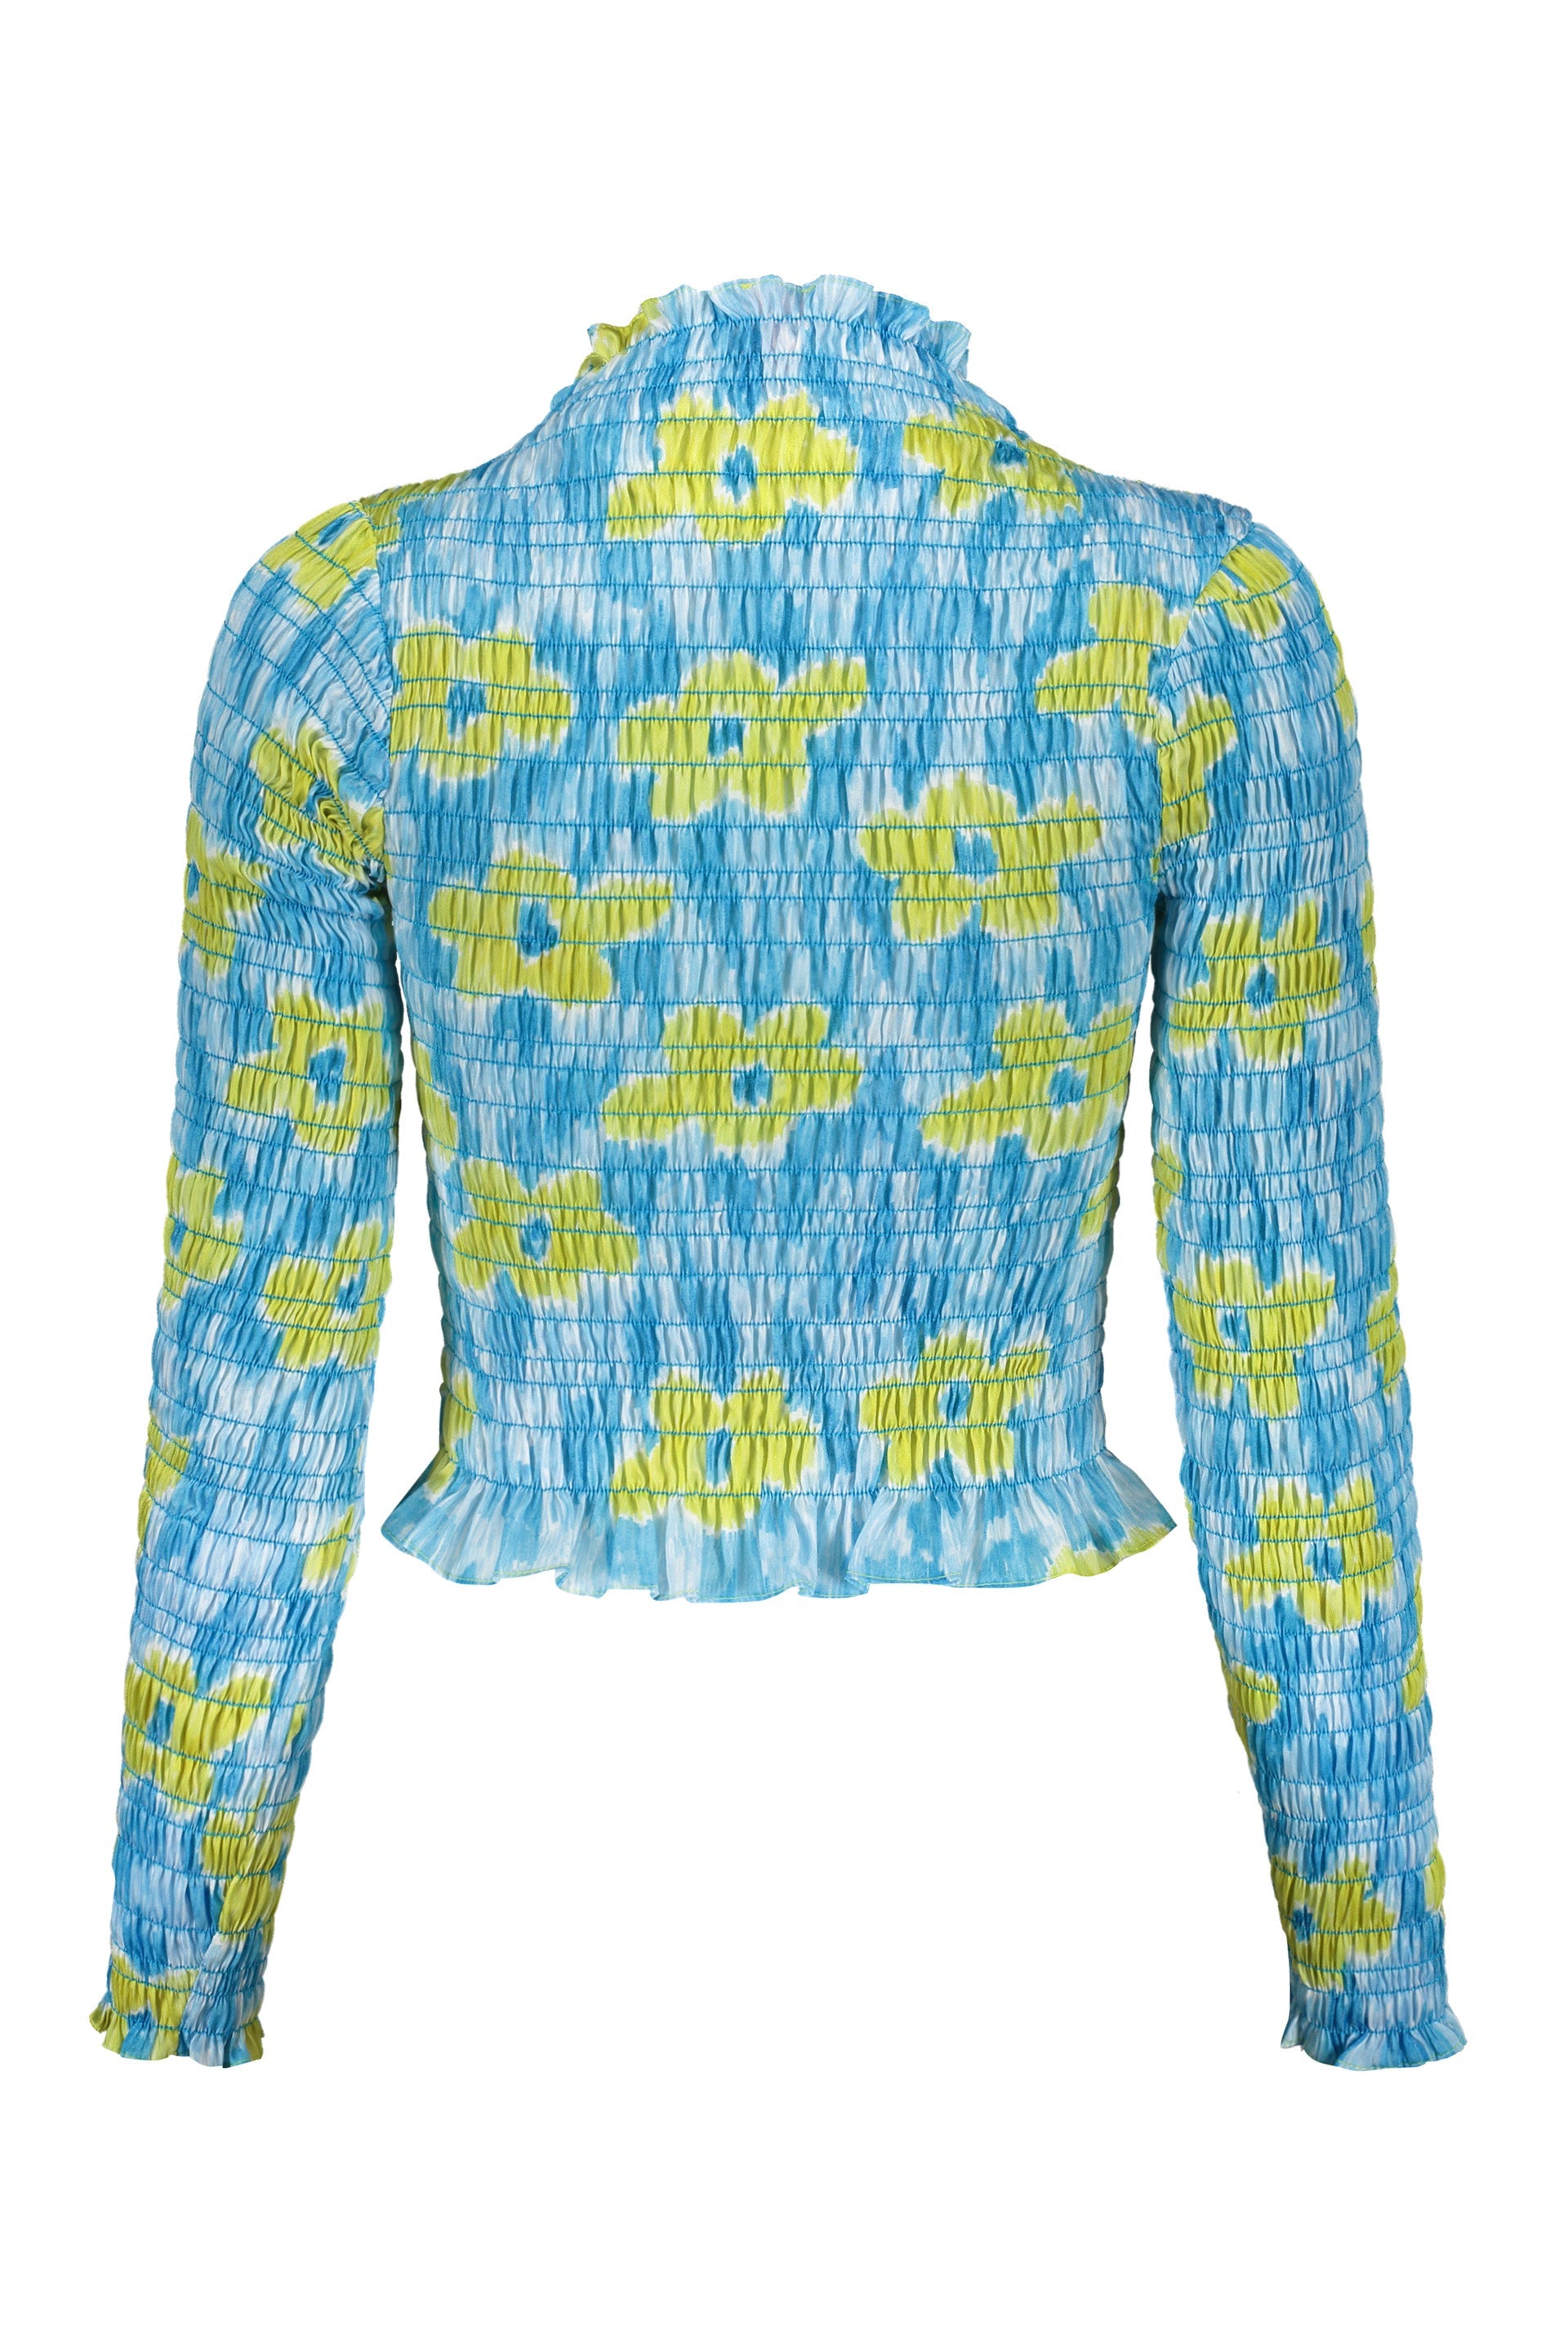 Amy-Crookes-OUTLET-SALE-Printed-long-sleeve-top-Shirts-XSS-ARCHIVE-COLLECTION-2.jpg